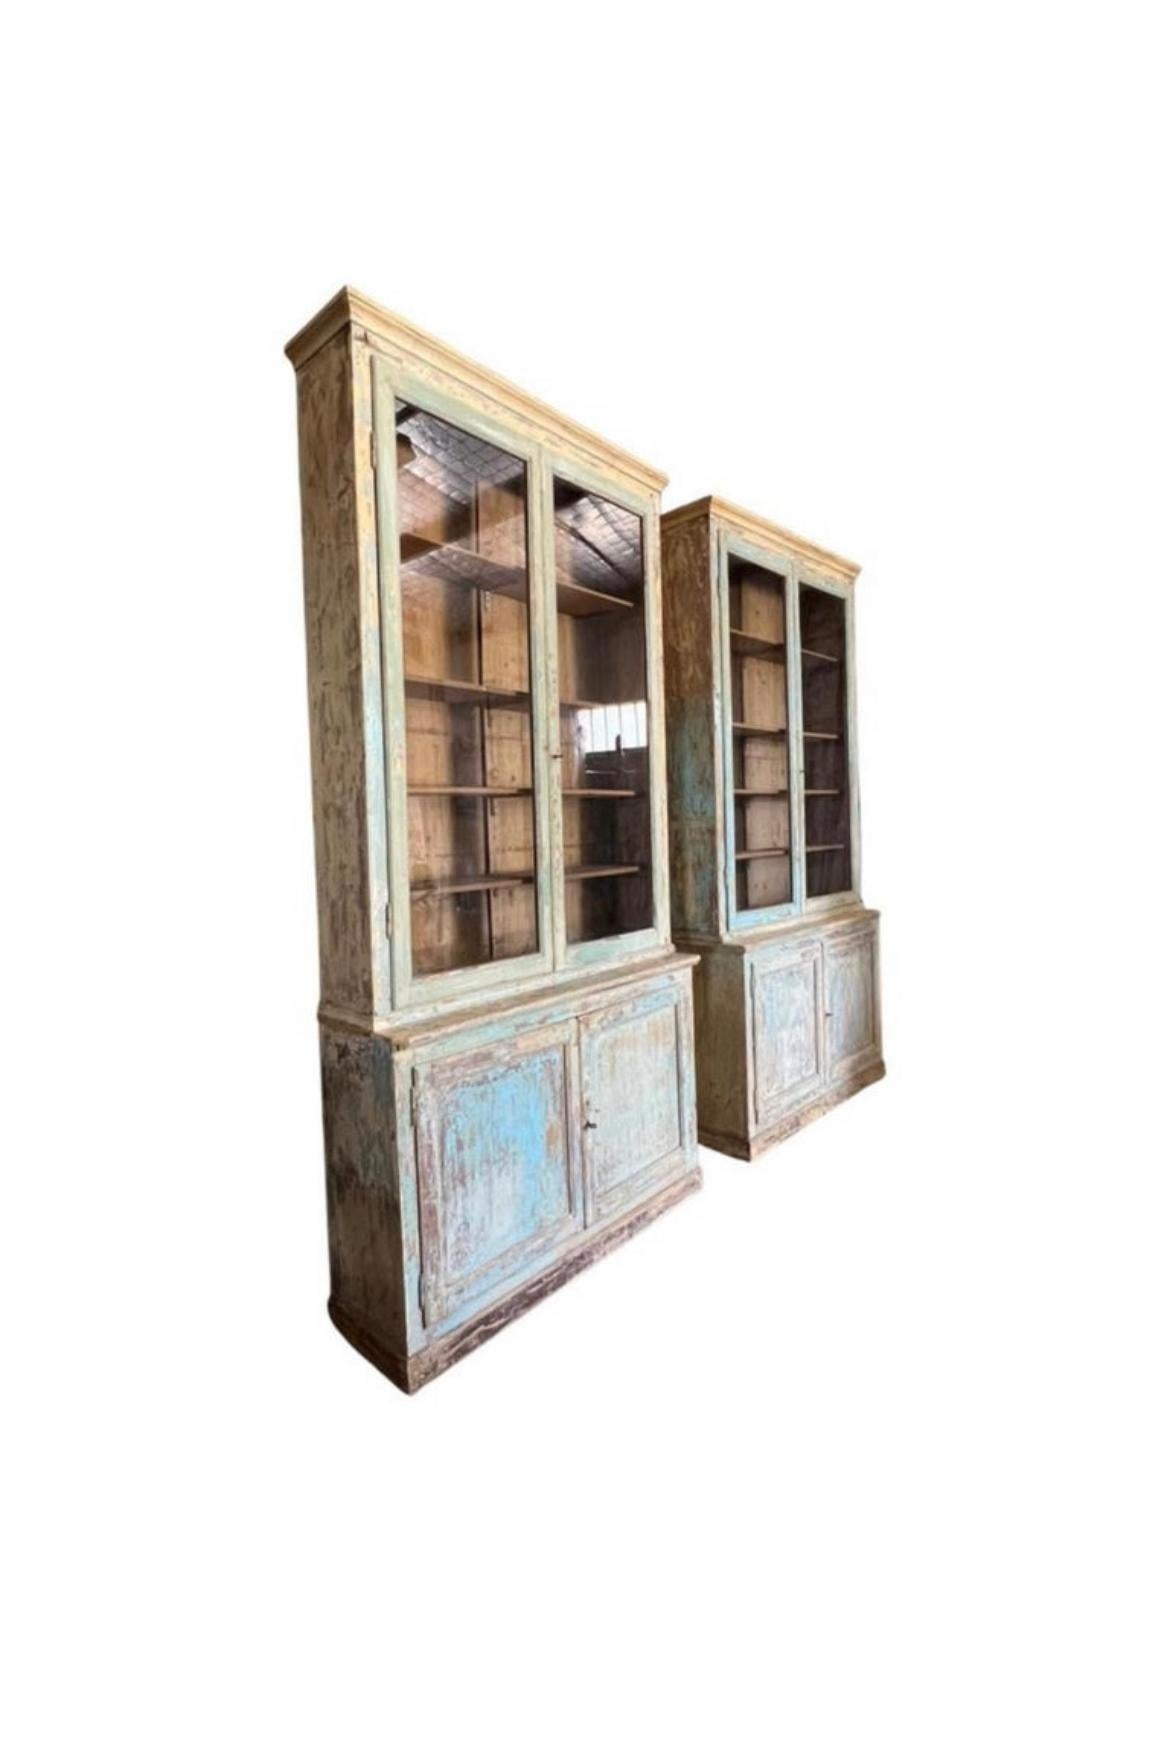 A magnificent pair of 19th Century French Bibliotheques with glass front doors on the upper cabinets. Dry scrapped with natural wood showing in certain areas with cream, green and blue shades. Stunning pieces that make a statement for any room.